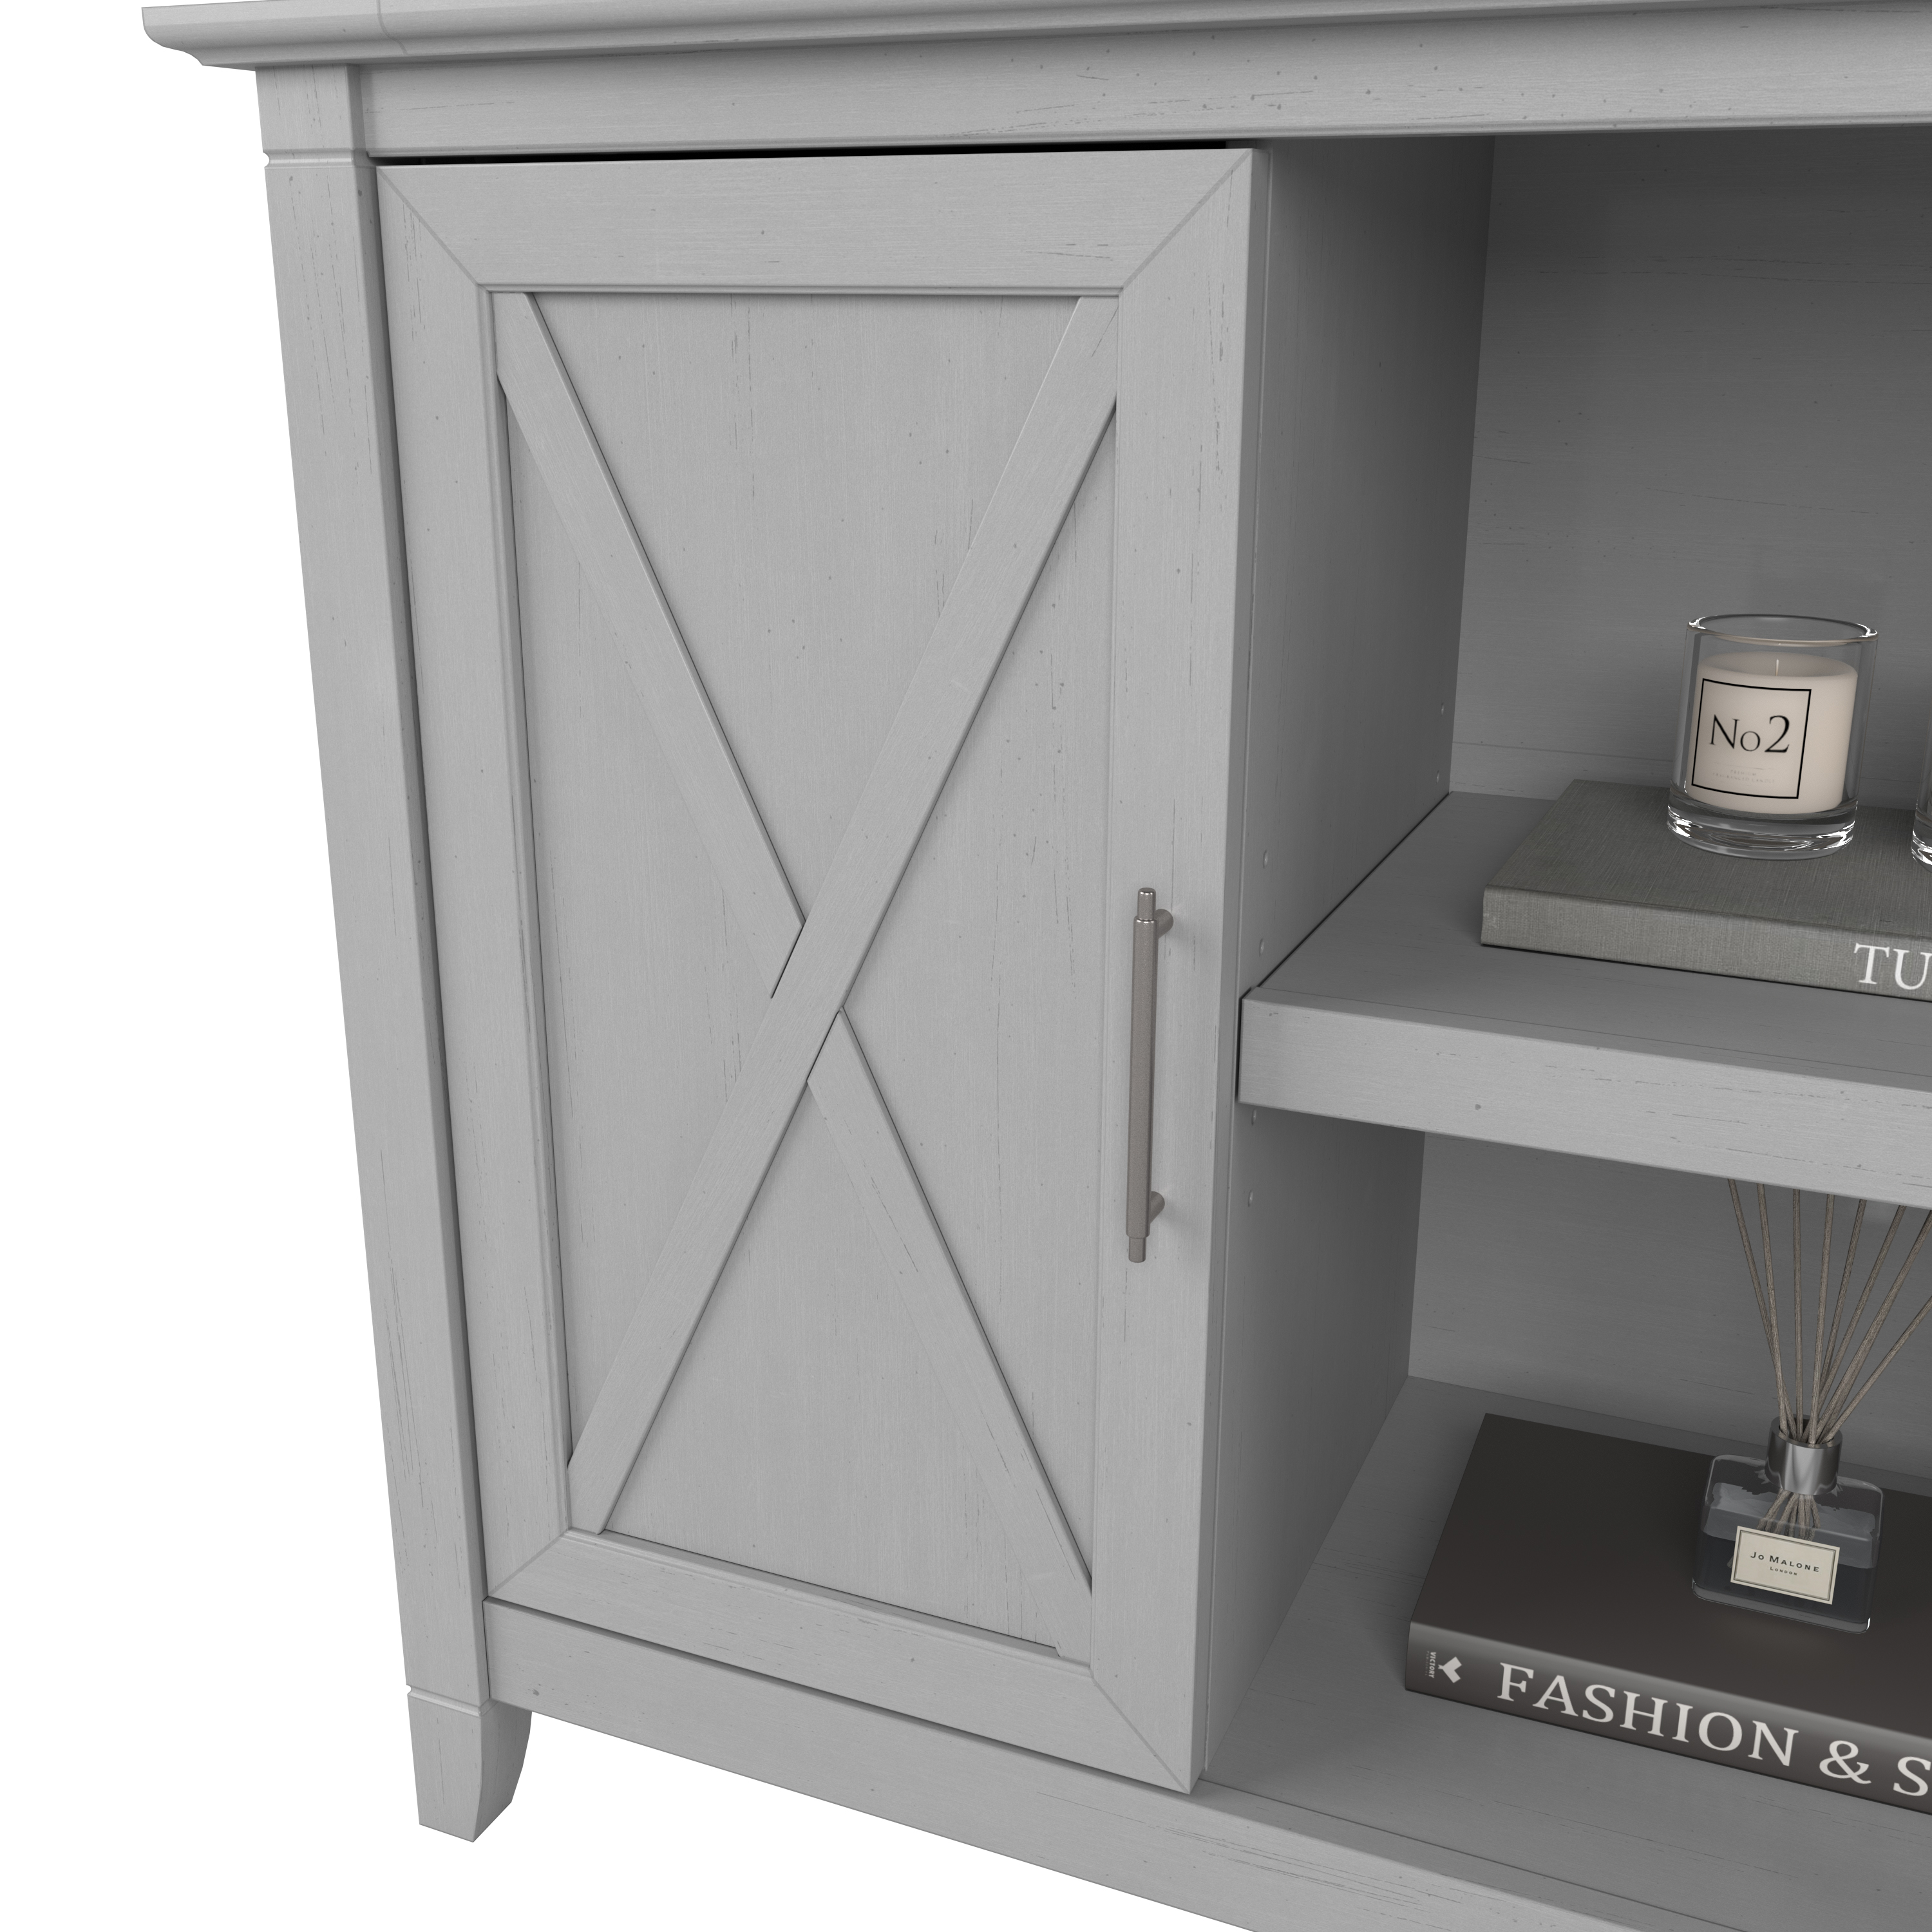 Shop Bush Furniture Key West Entryway Storage Set with Hall Tree, Shoe Bench and 2 Door Cabinet 04 KWS054CG #color_cape cod gray